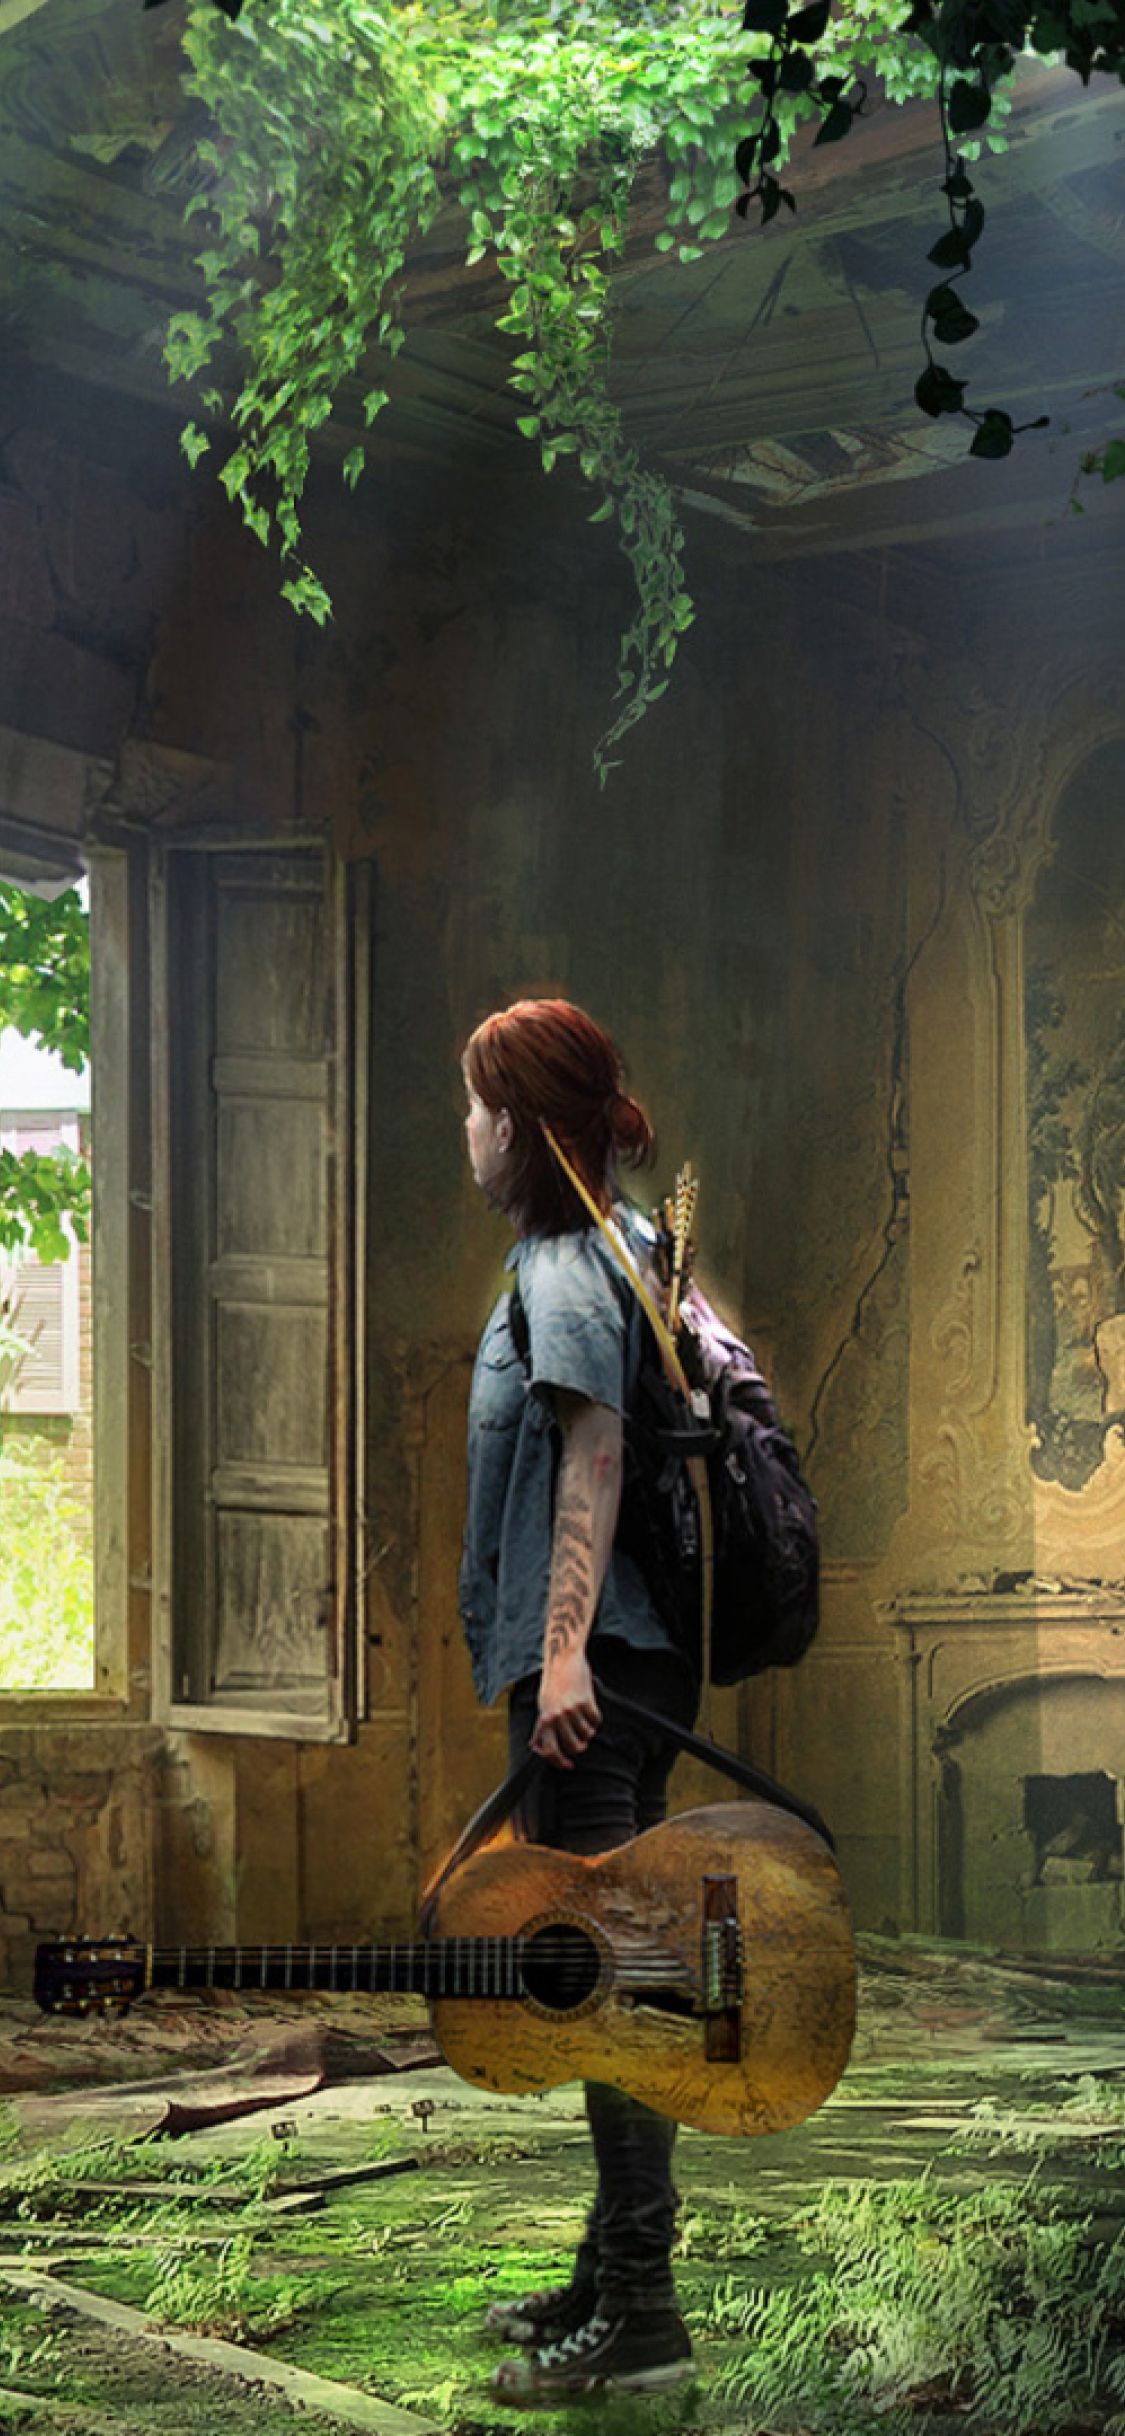 Last Of Us 2 iPhone Wallpapers  The last of us, The lest of us, Background  images